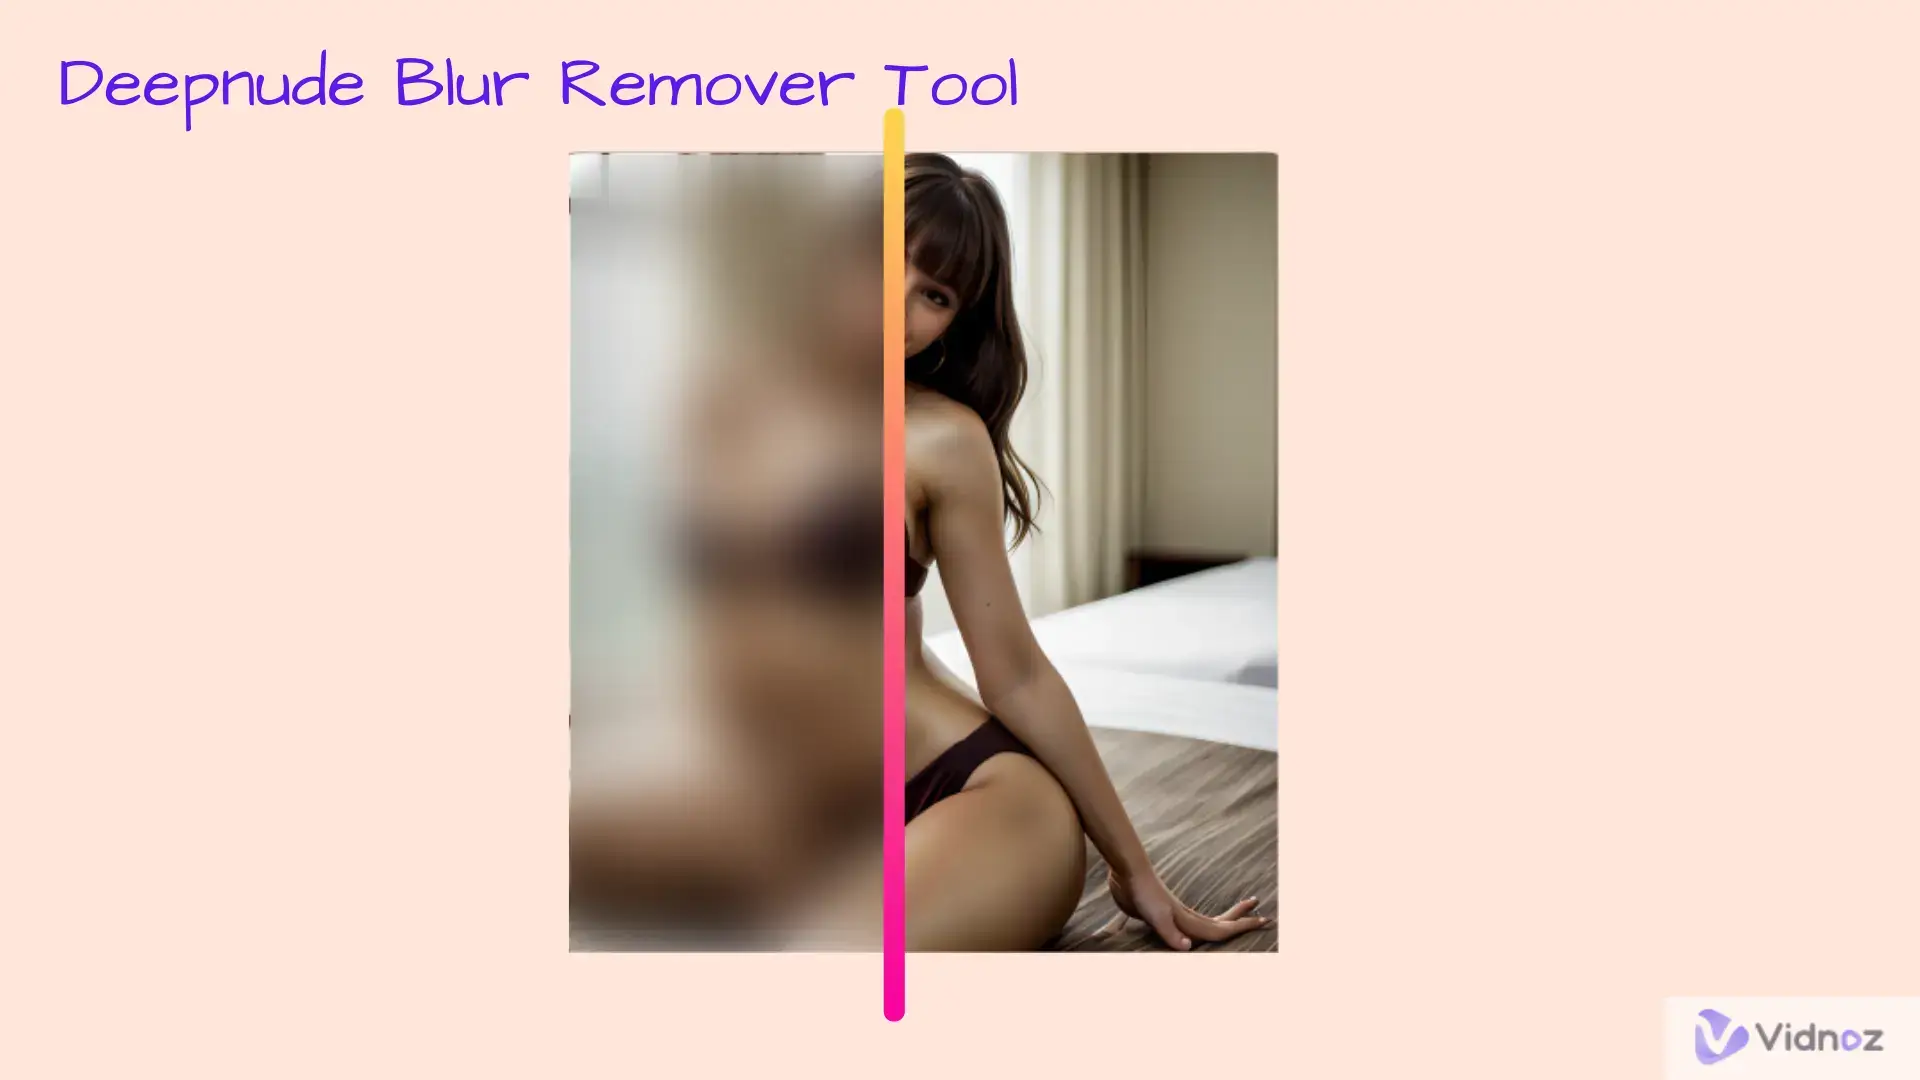 Top 4 Practical Online Deepnude Blur Remover Tools to Effectively Unblur Deepnude Images